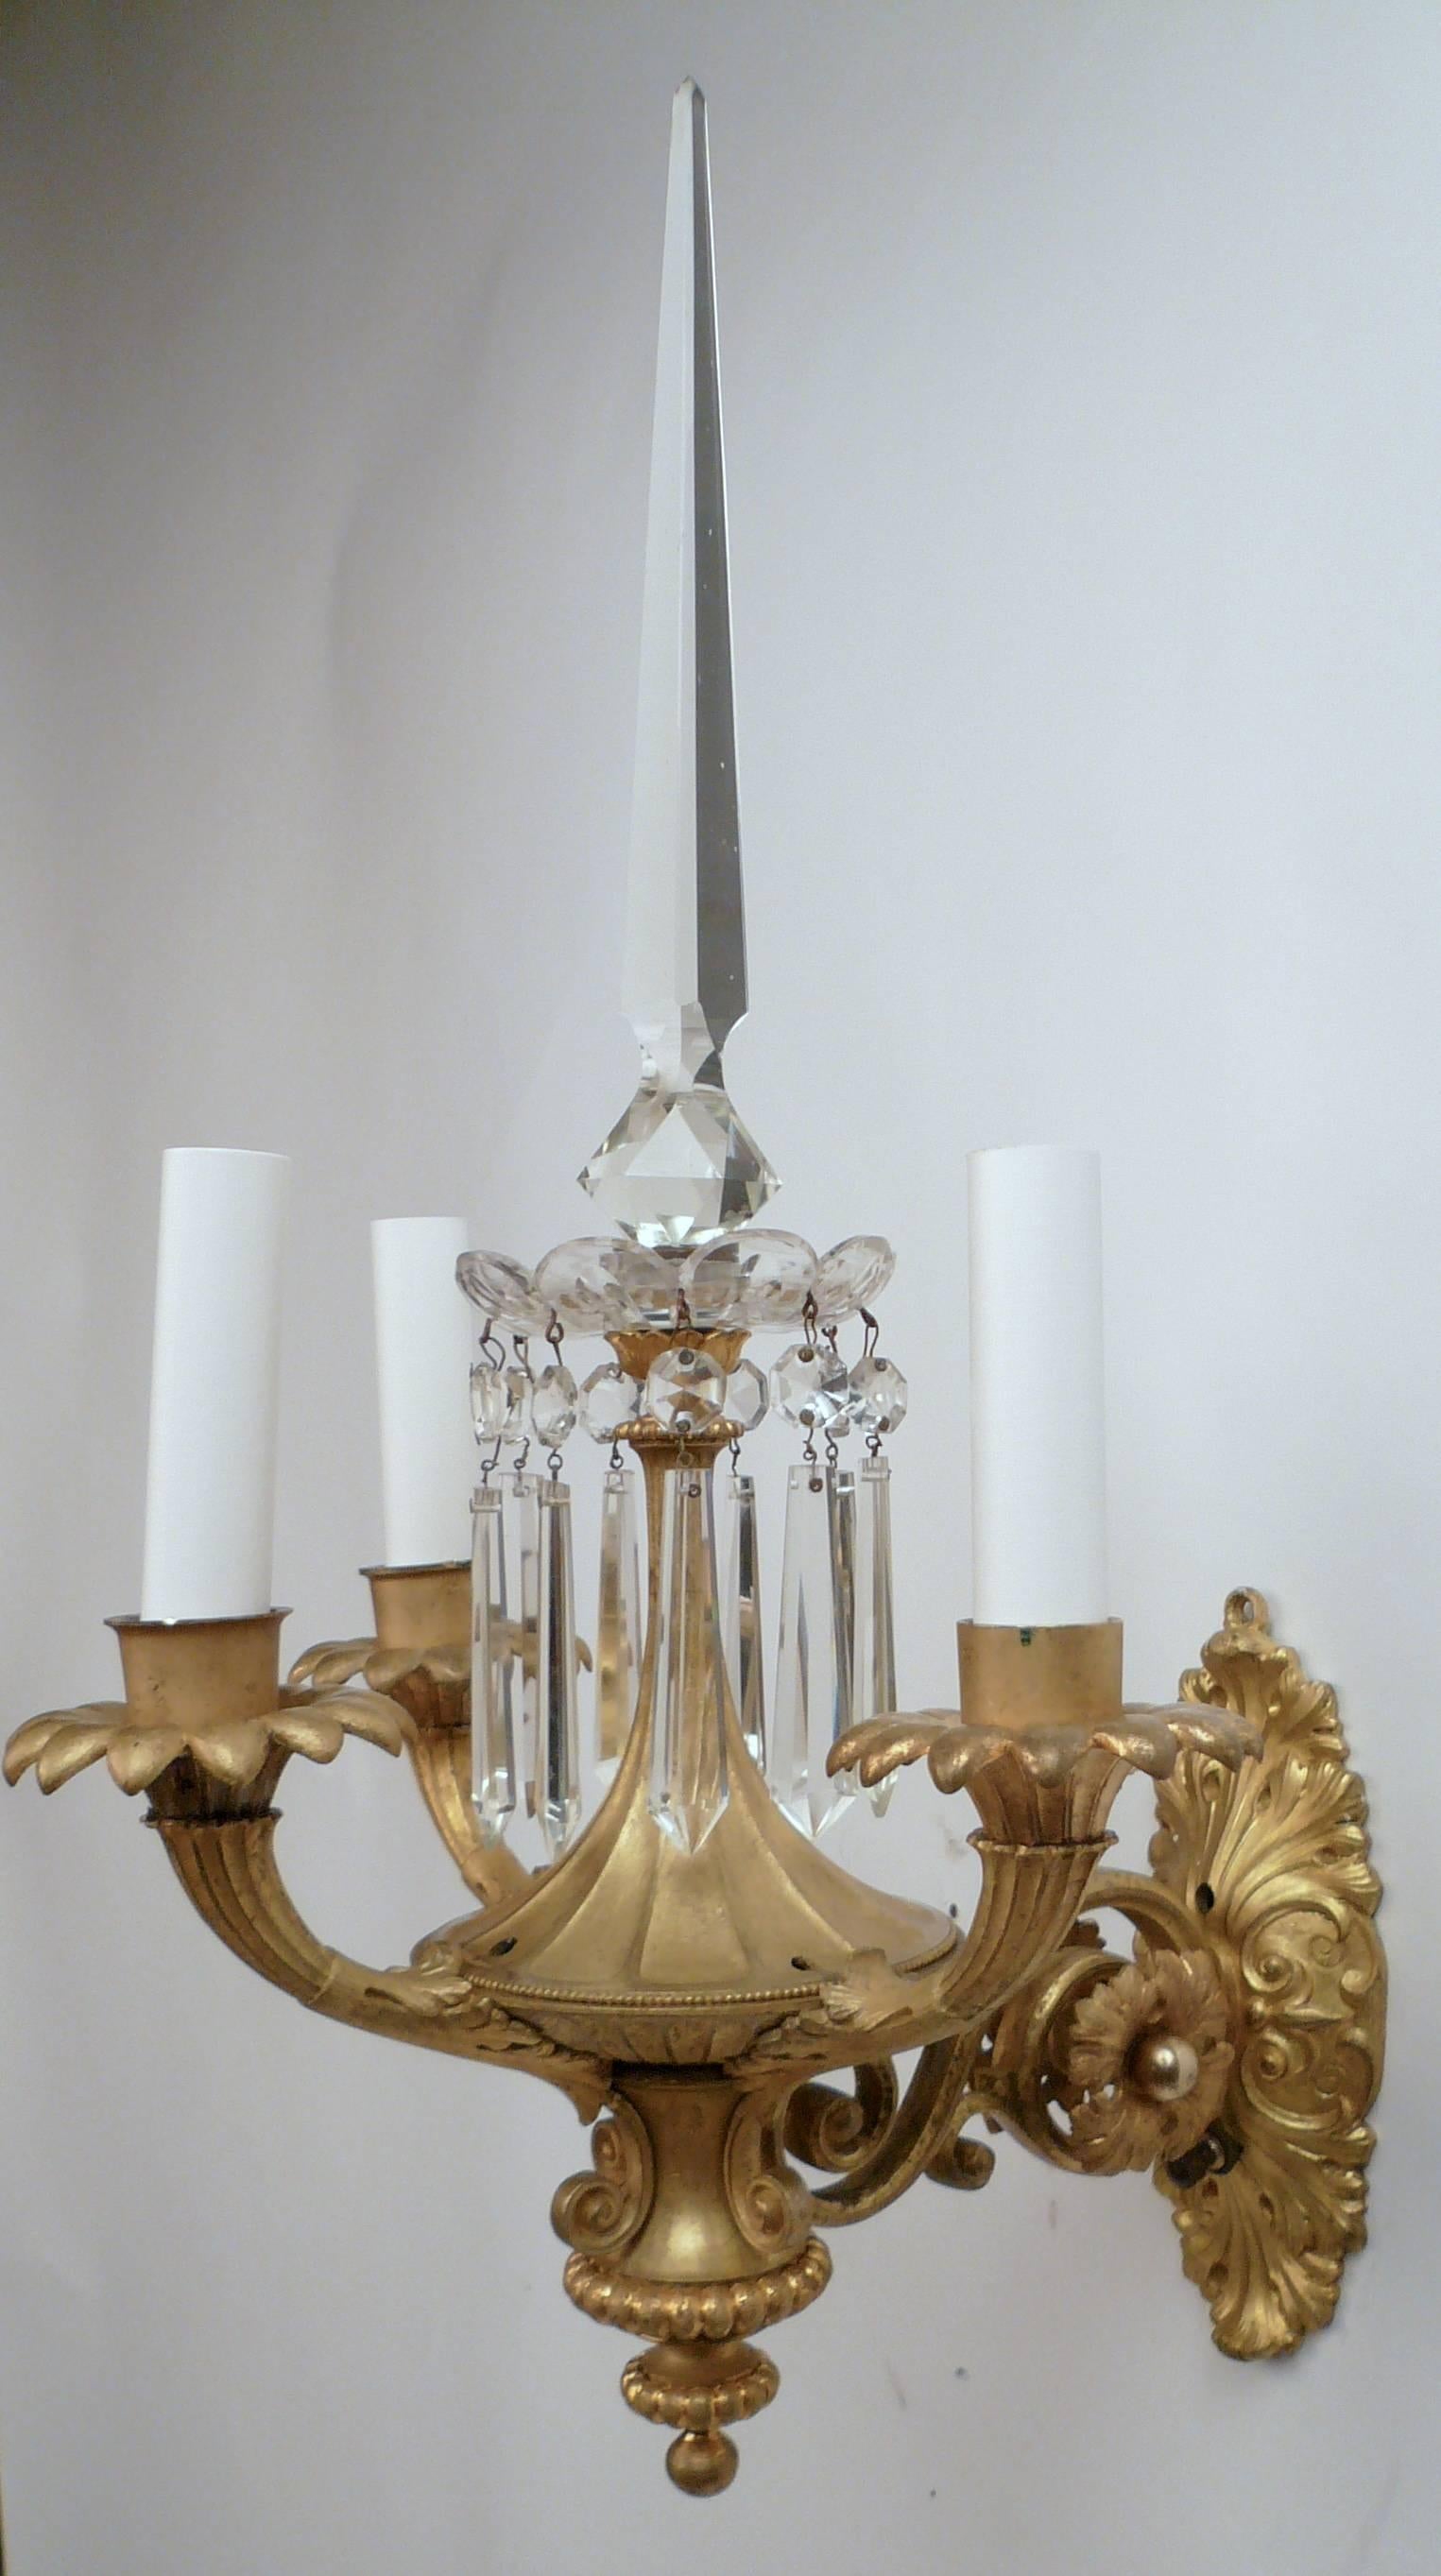 William IV Pair 19th Century English Gilt Brass and Crystal Neoclassical Style Sconces For Sale